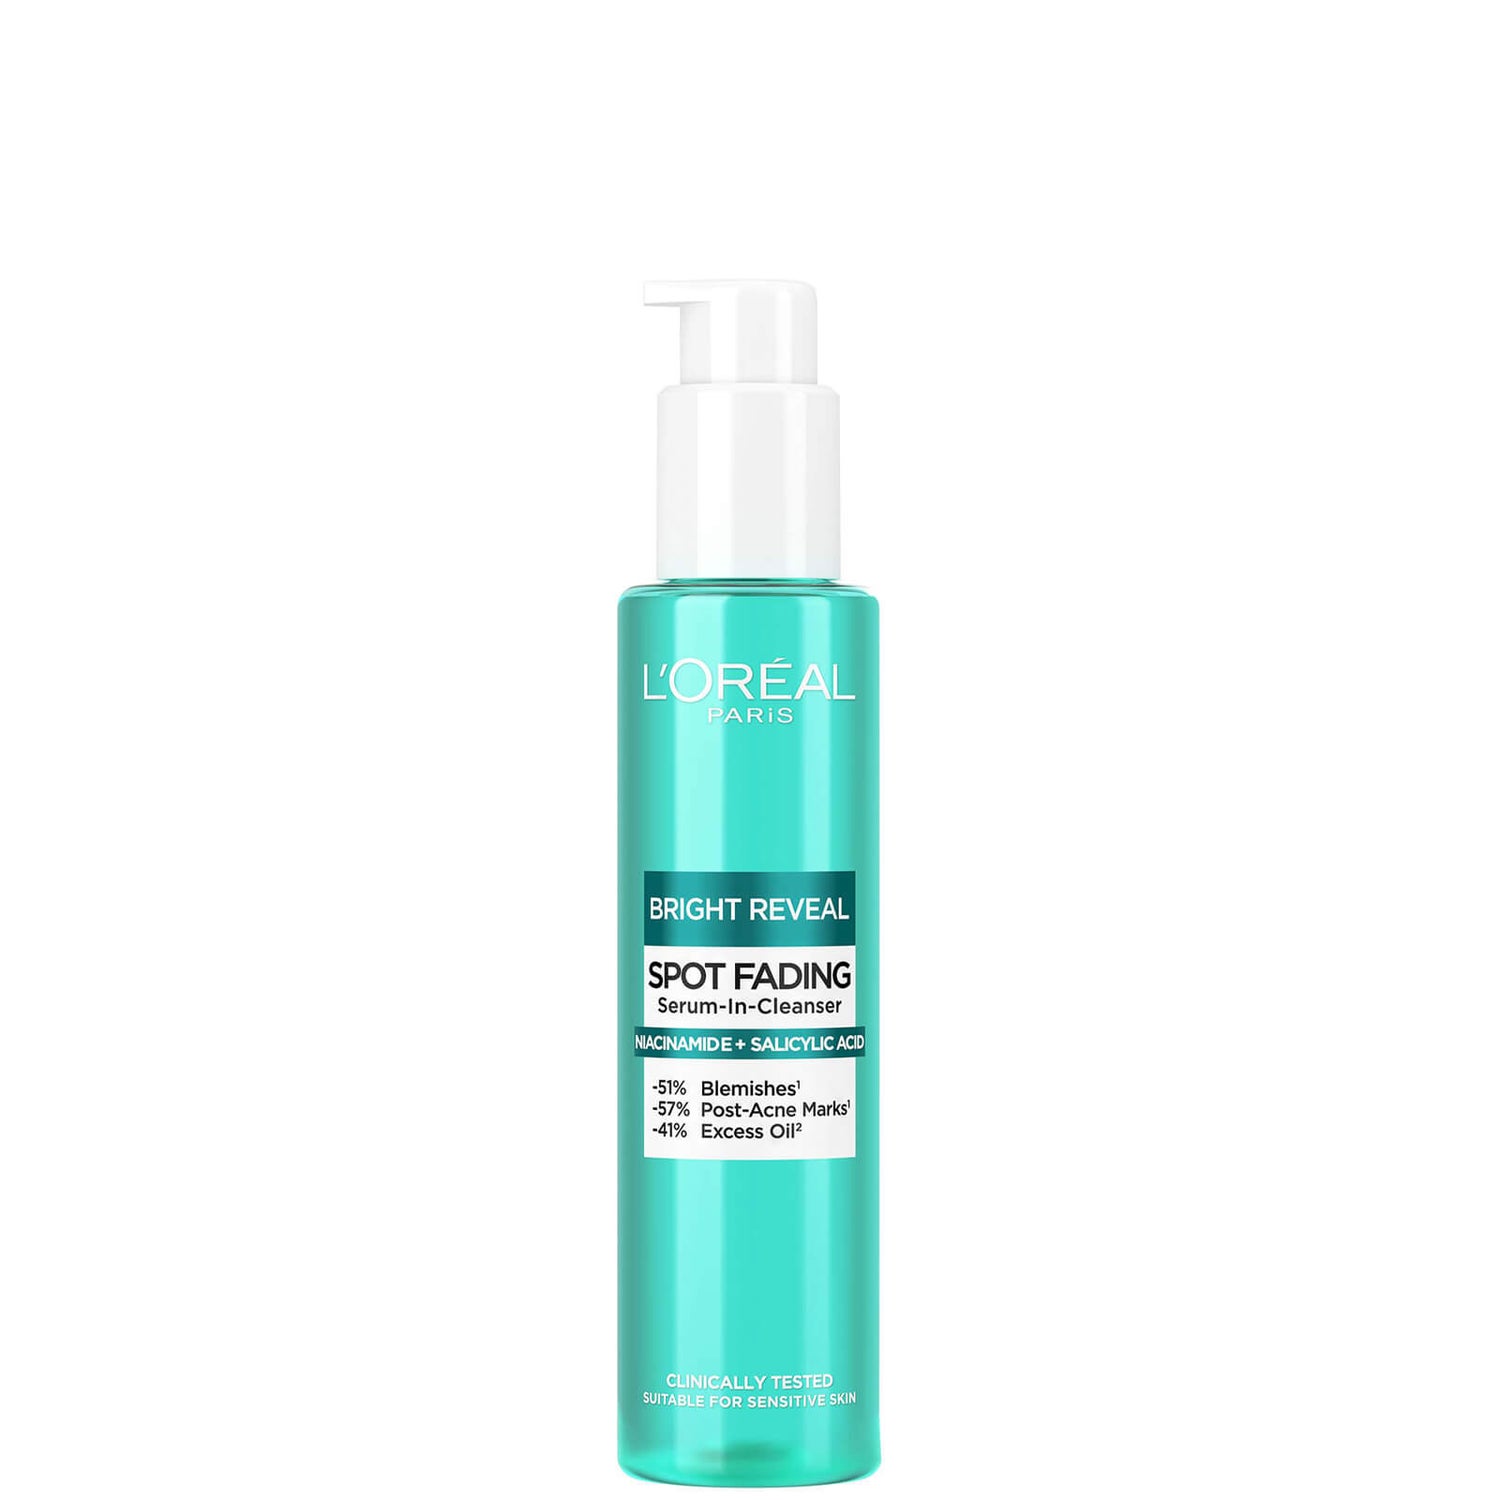 L'Oréal Paris Bright Reveal Spot Fading Serum-in-Cleanser with Niacinamide and Salicylic Acid 150ml